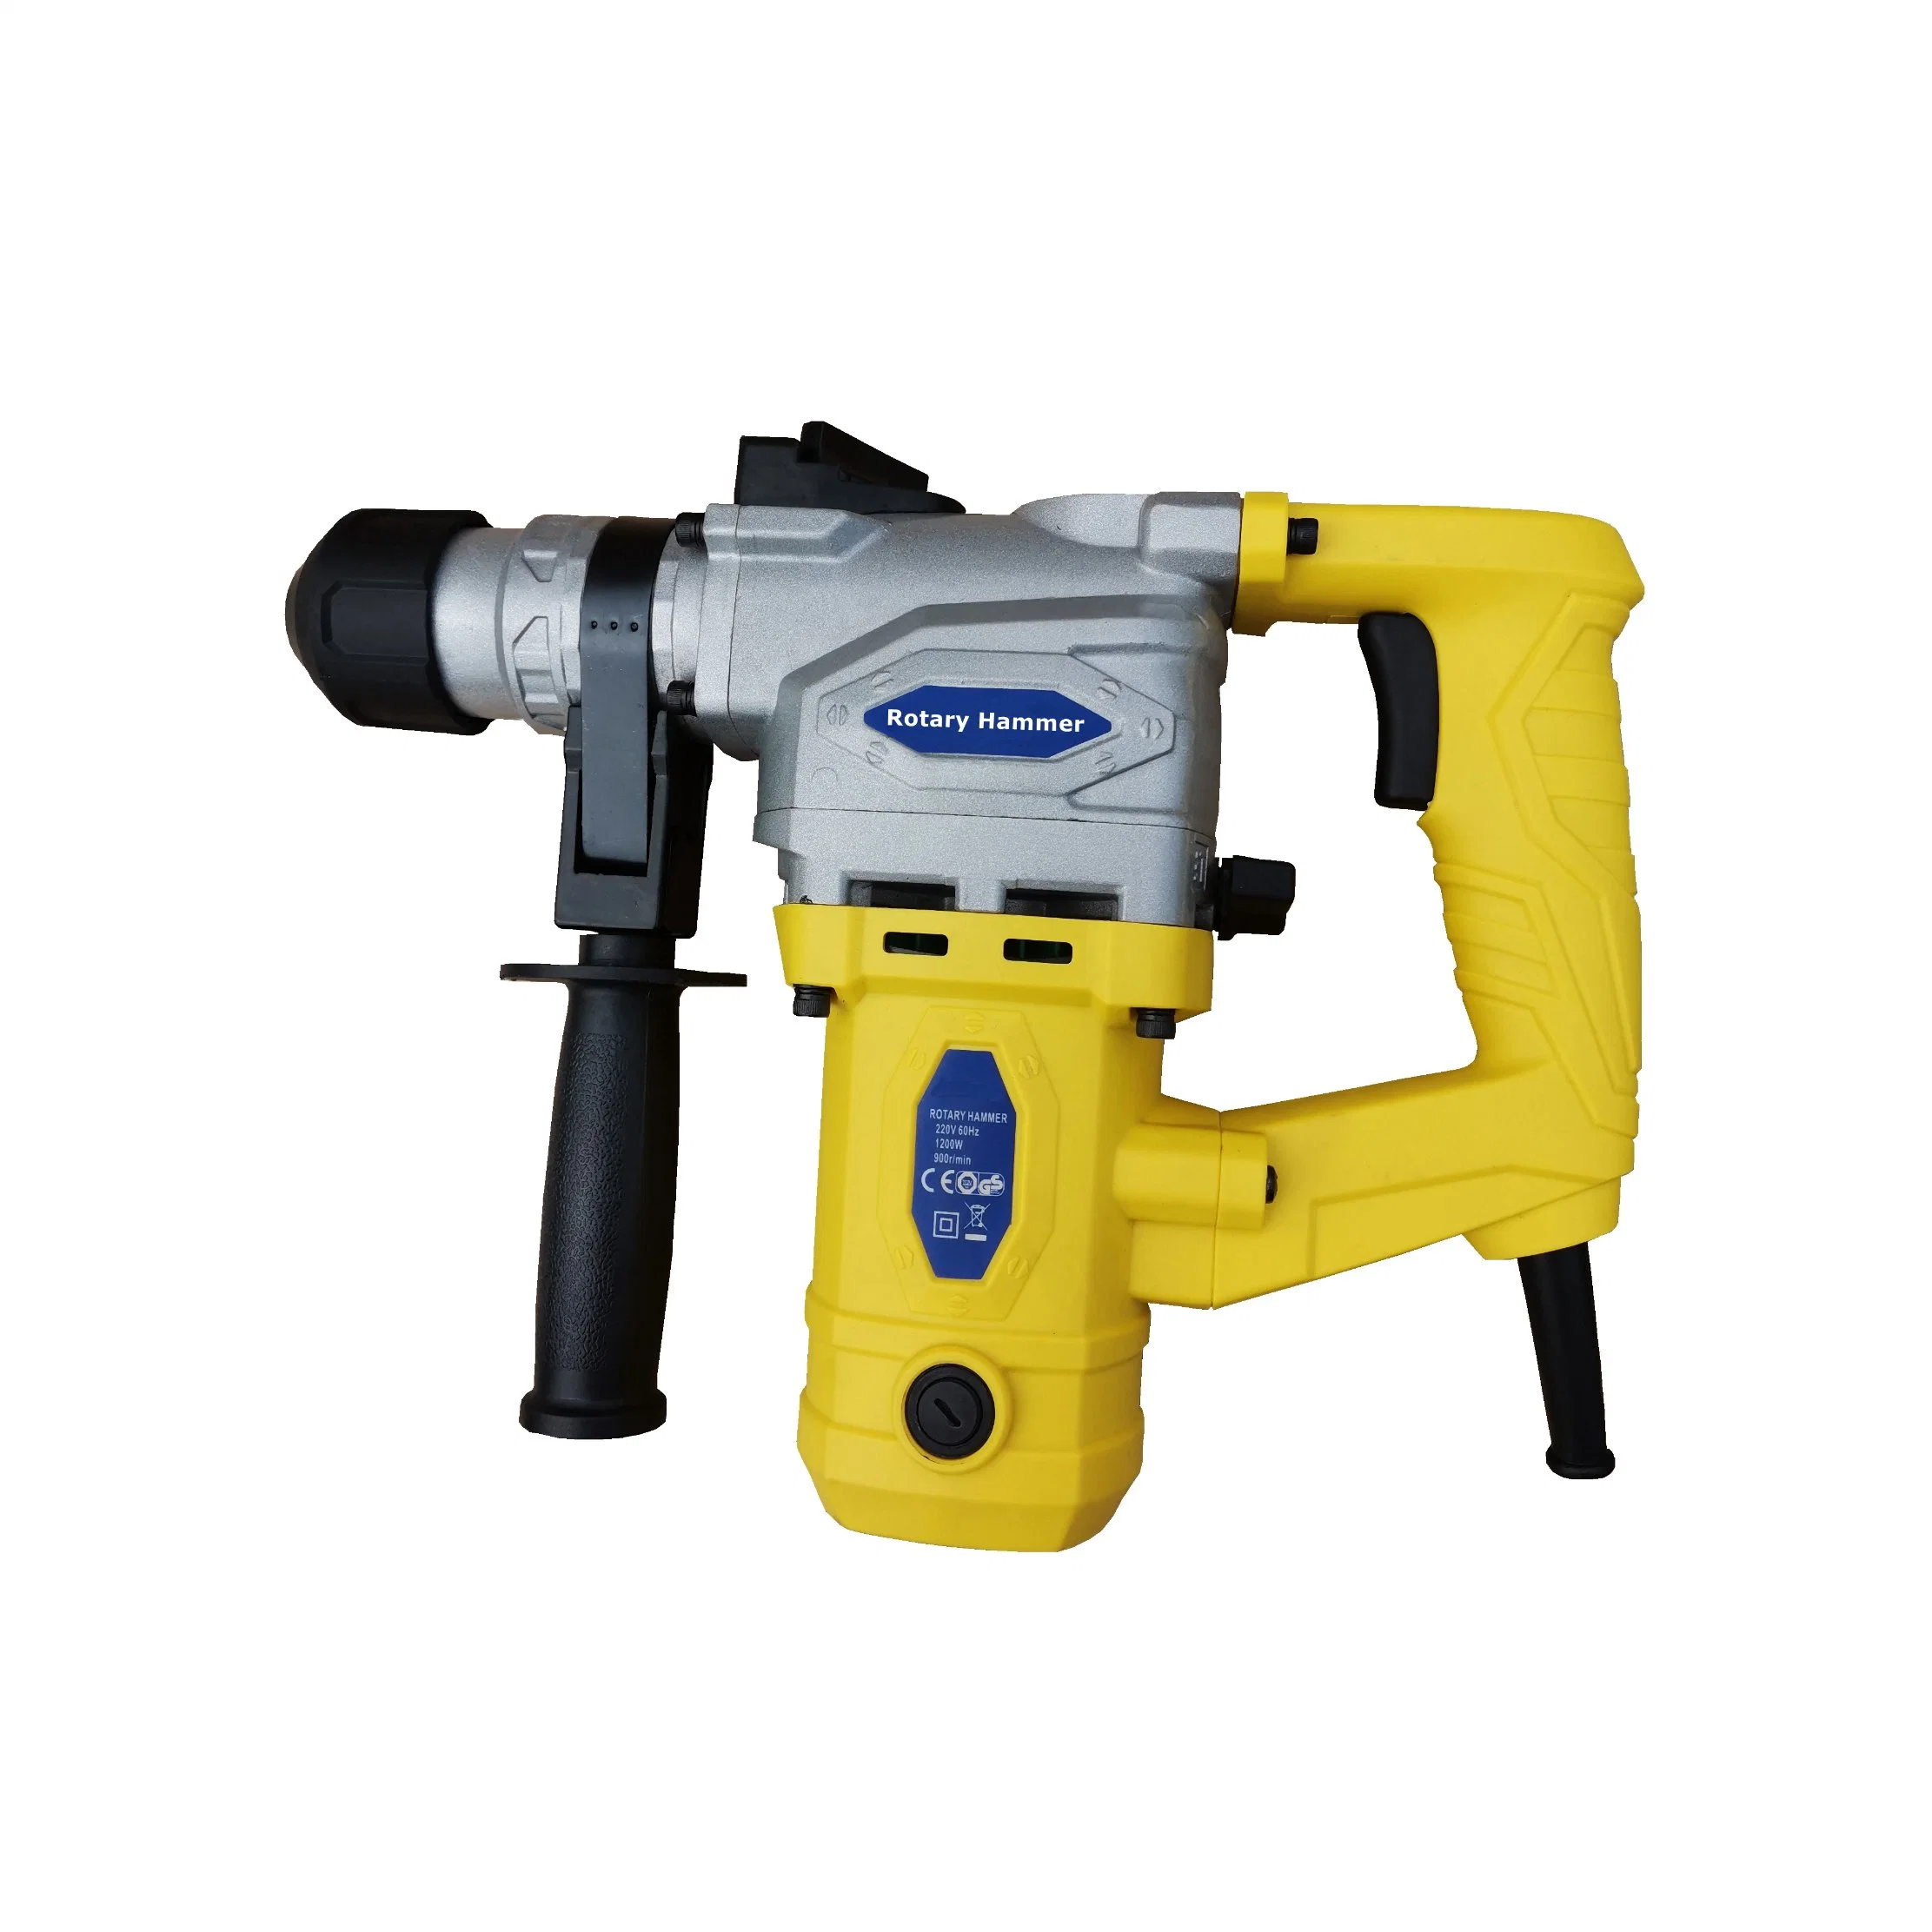 China Manufacturer Produced 900W 26mm Electric Rotary Hammer